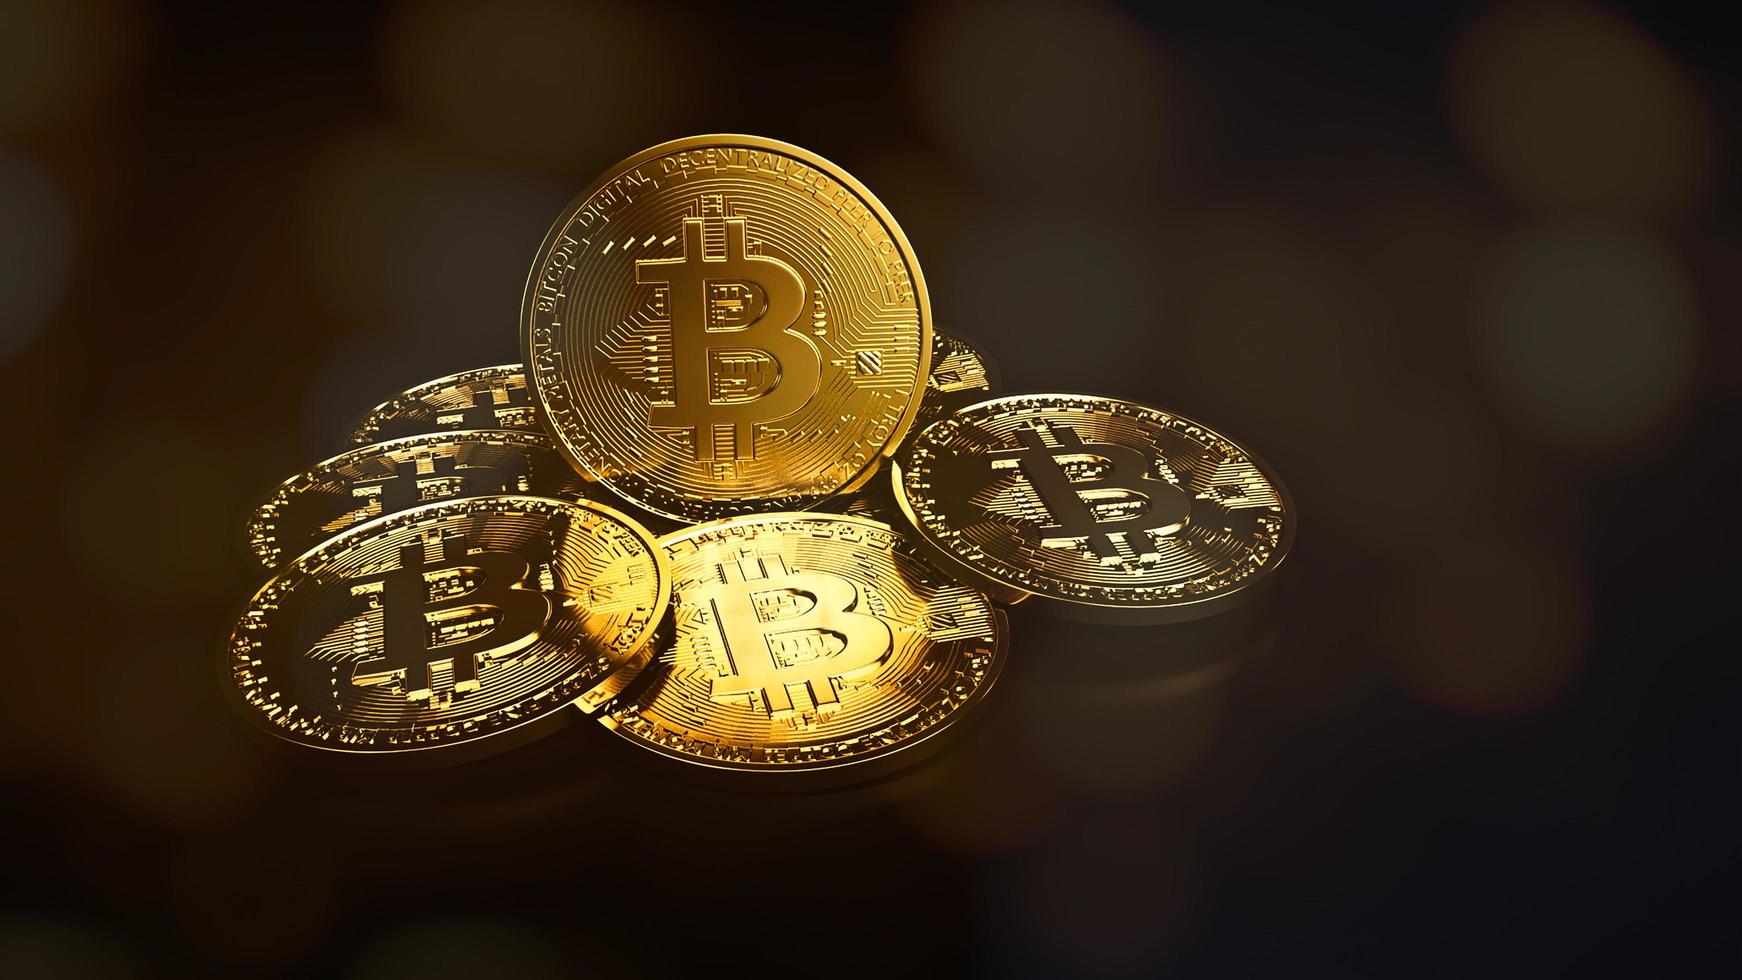 stack of bitcoin digital currency. Cryptocurrency BTC the new virtual money Close up 3D render of golden Bitcoins on black background photo